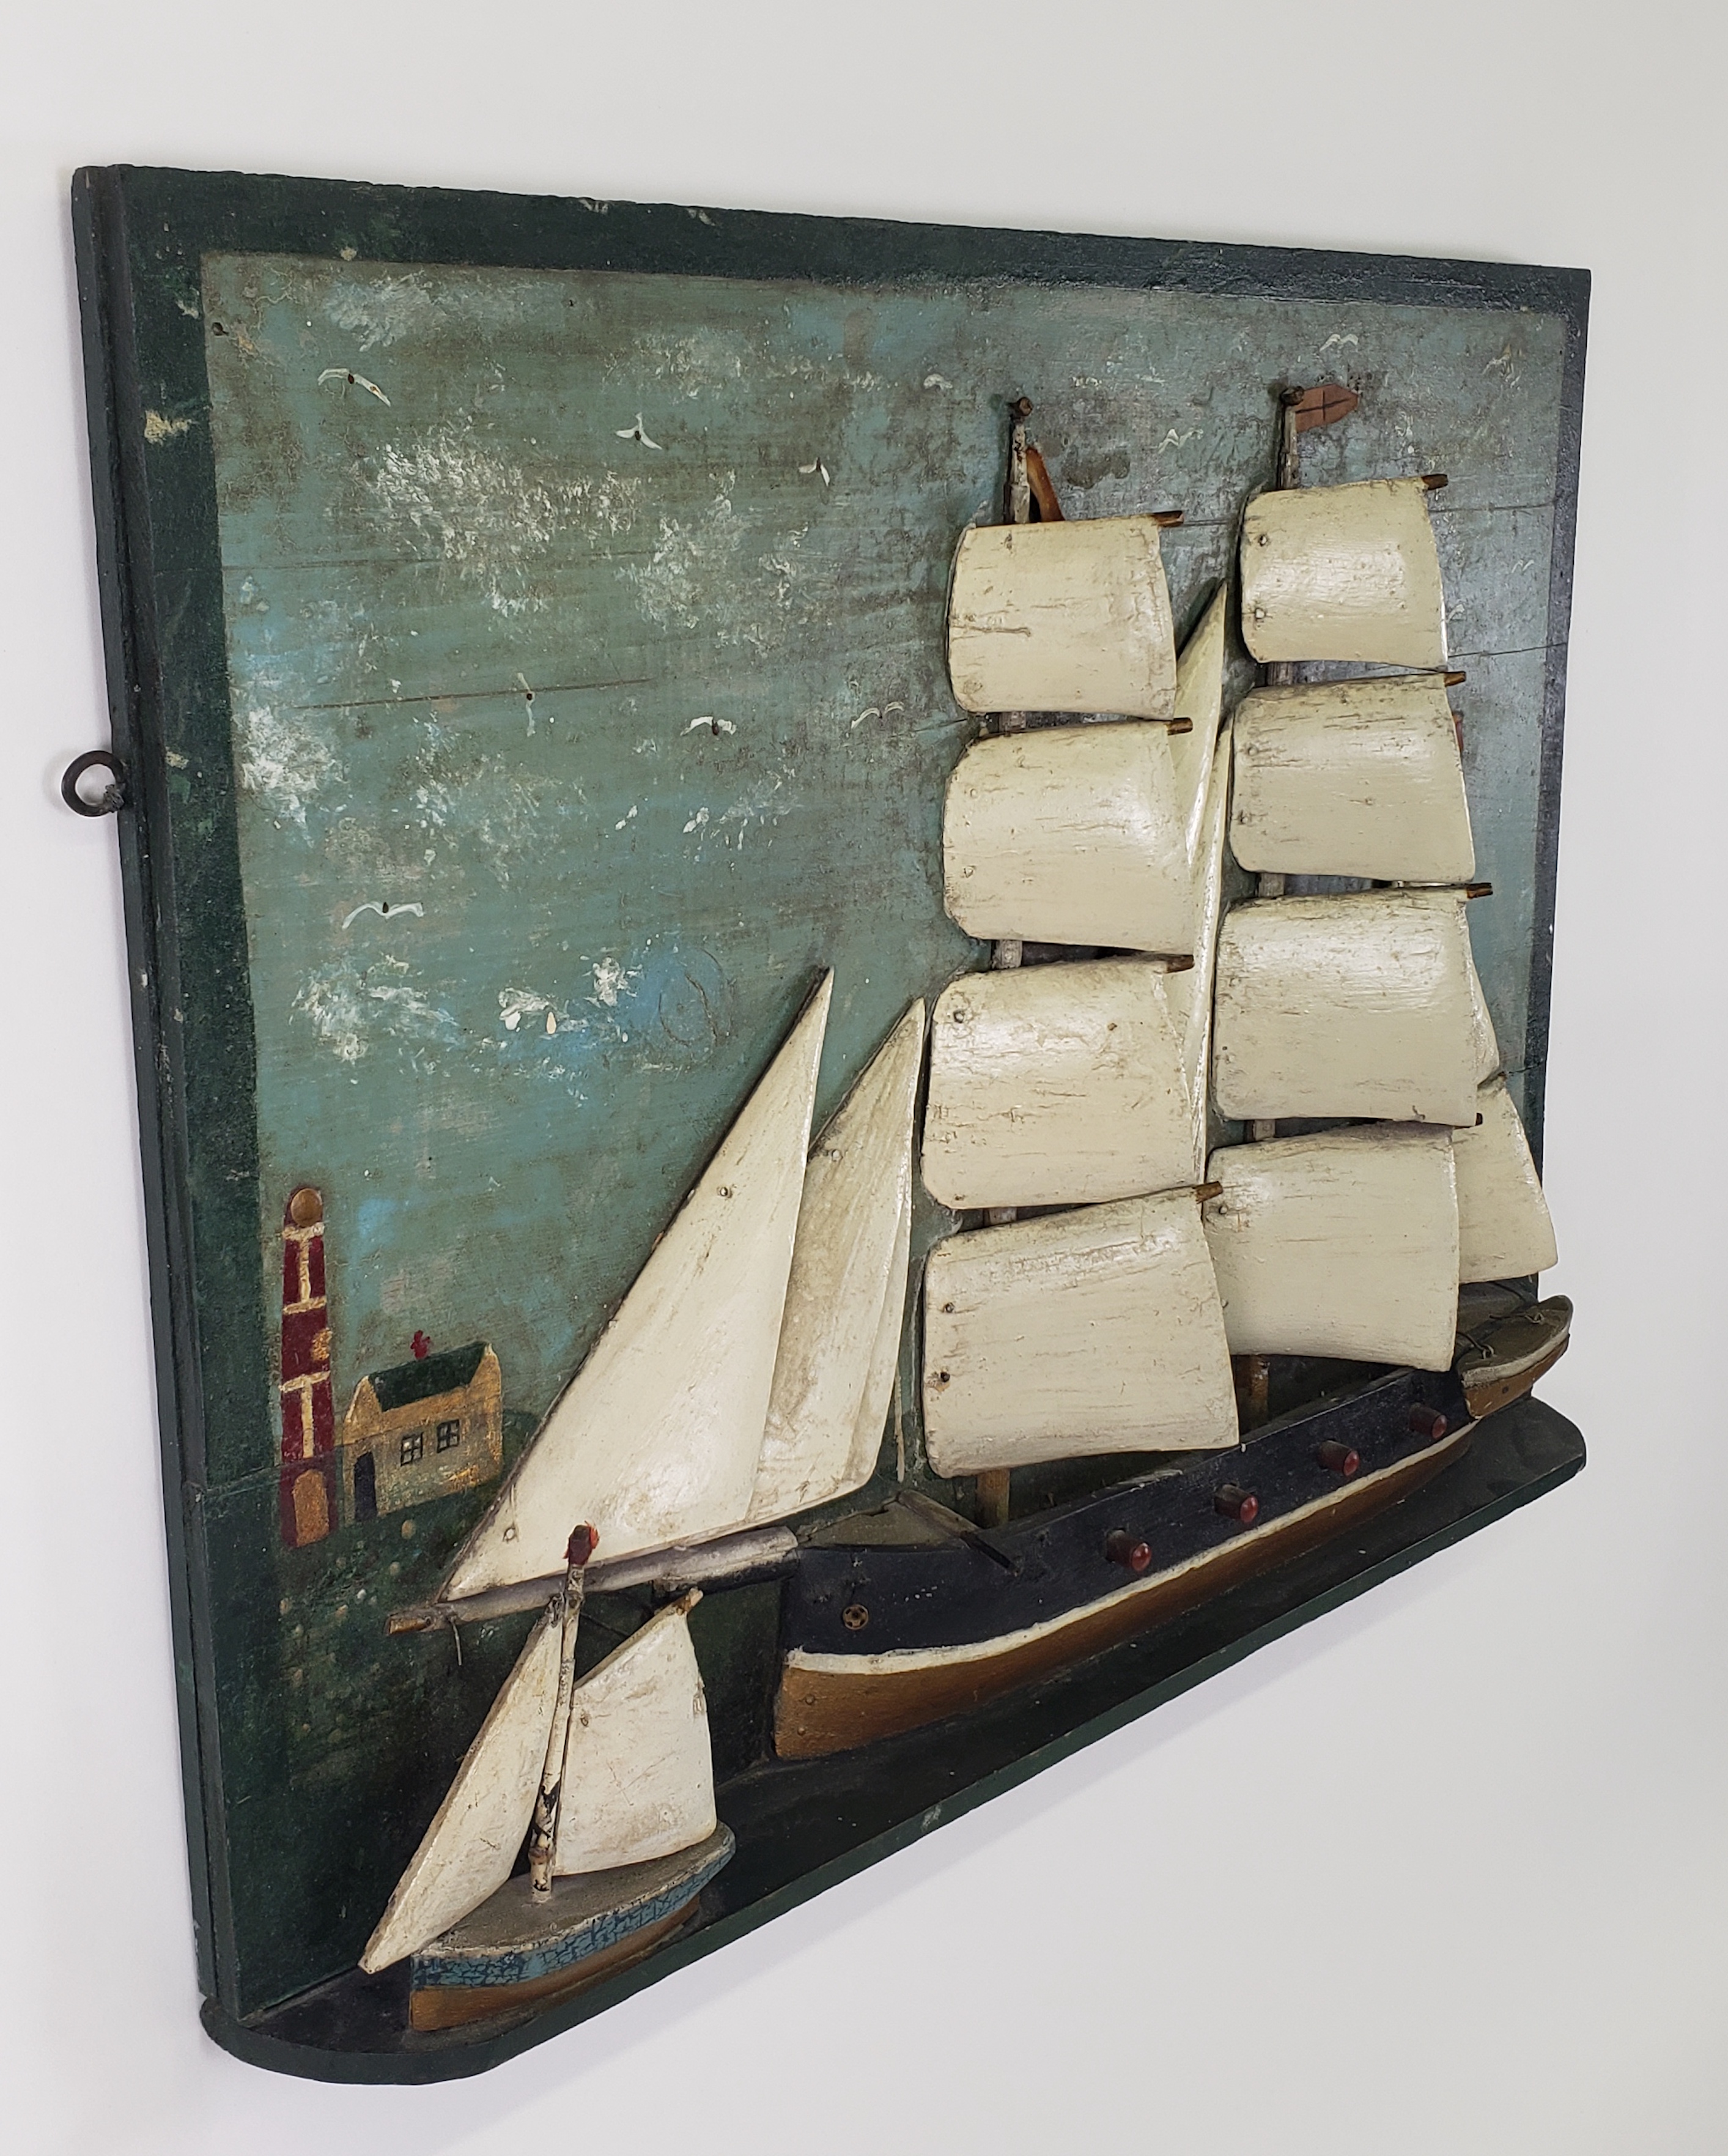 Antique American Folk Art Carved and Painted Ship Plaque, 19th century